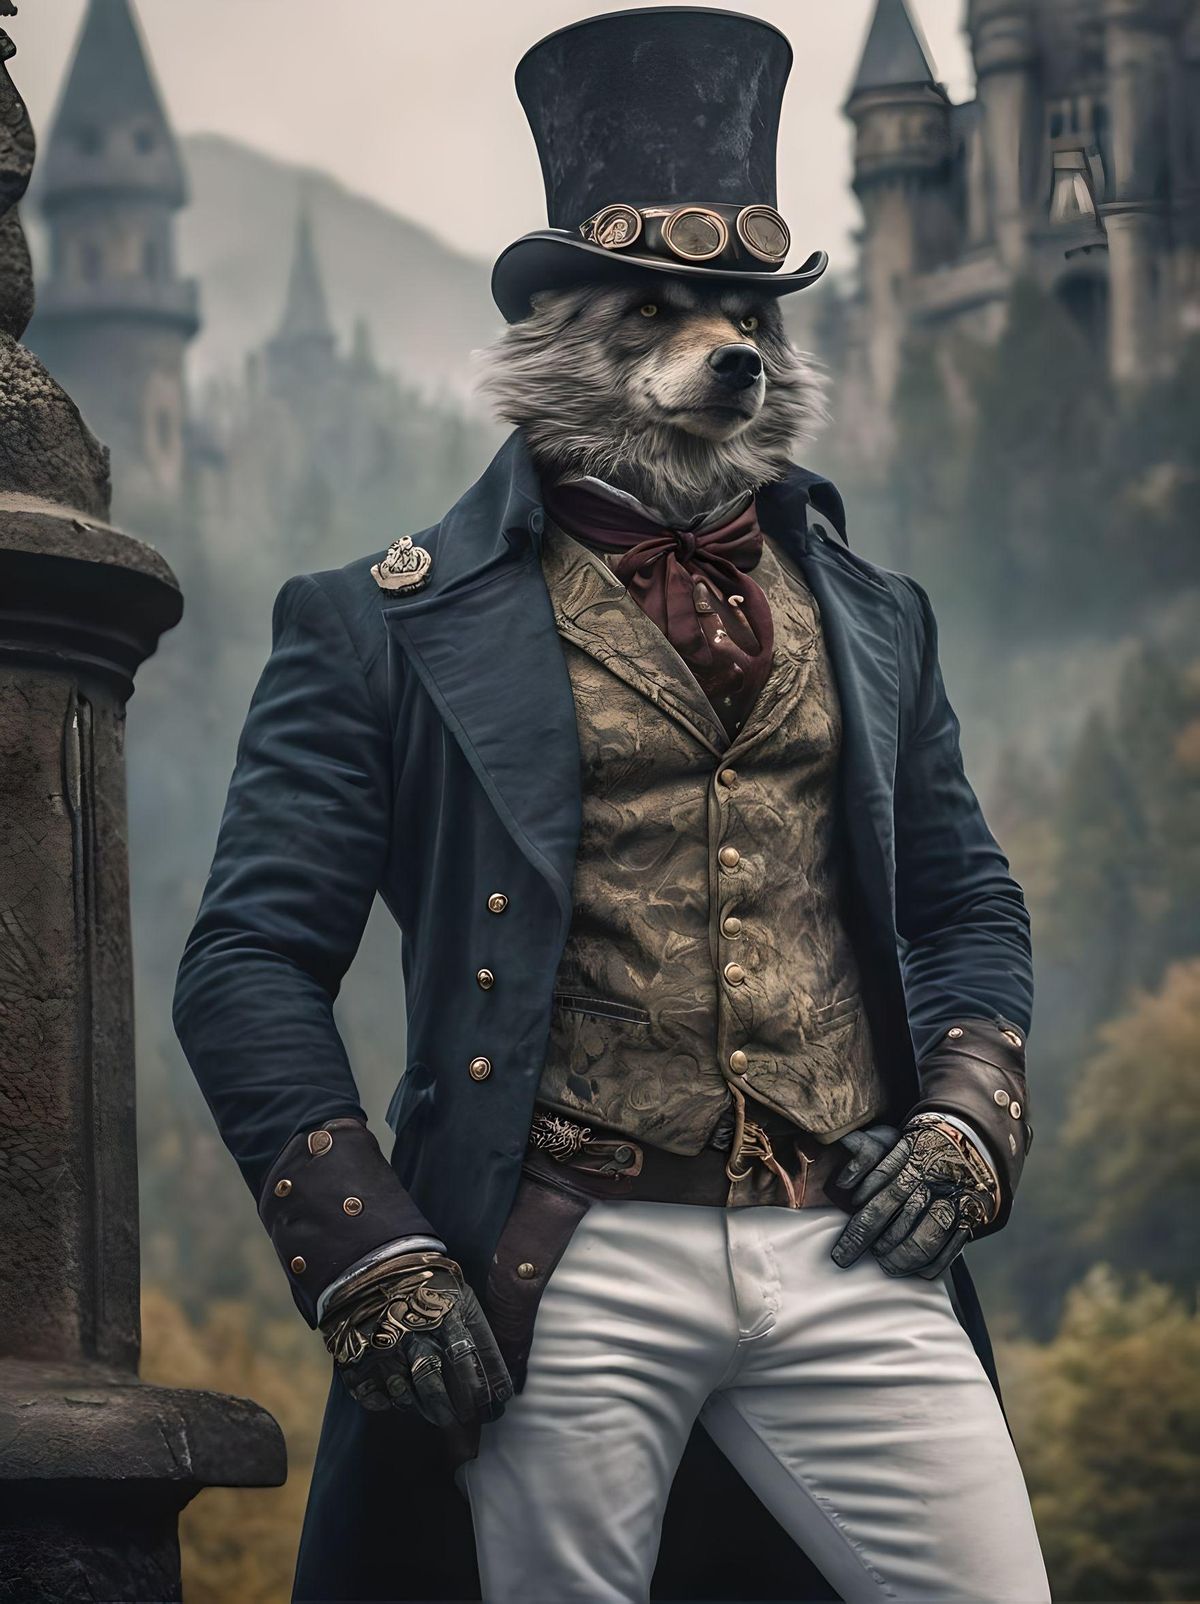 Ultra realistic detail, steampunk style, steampunk aesthetic, Werewolf, white, athletic build, muscular, defined muscles, standing upright, shirt, jacket, pants, top hat, forest, castle, fog, mountains.